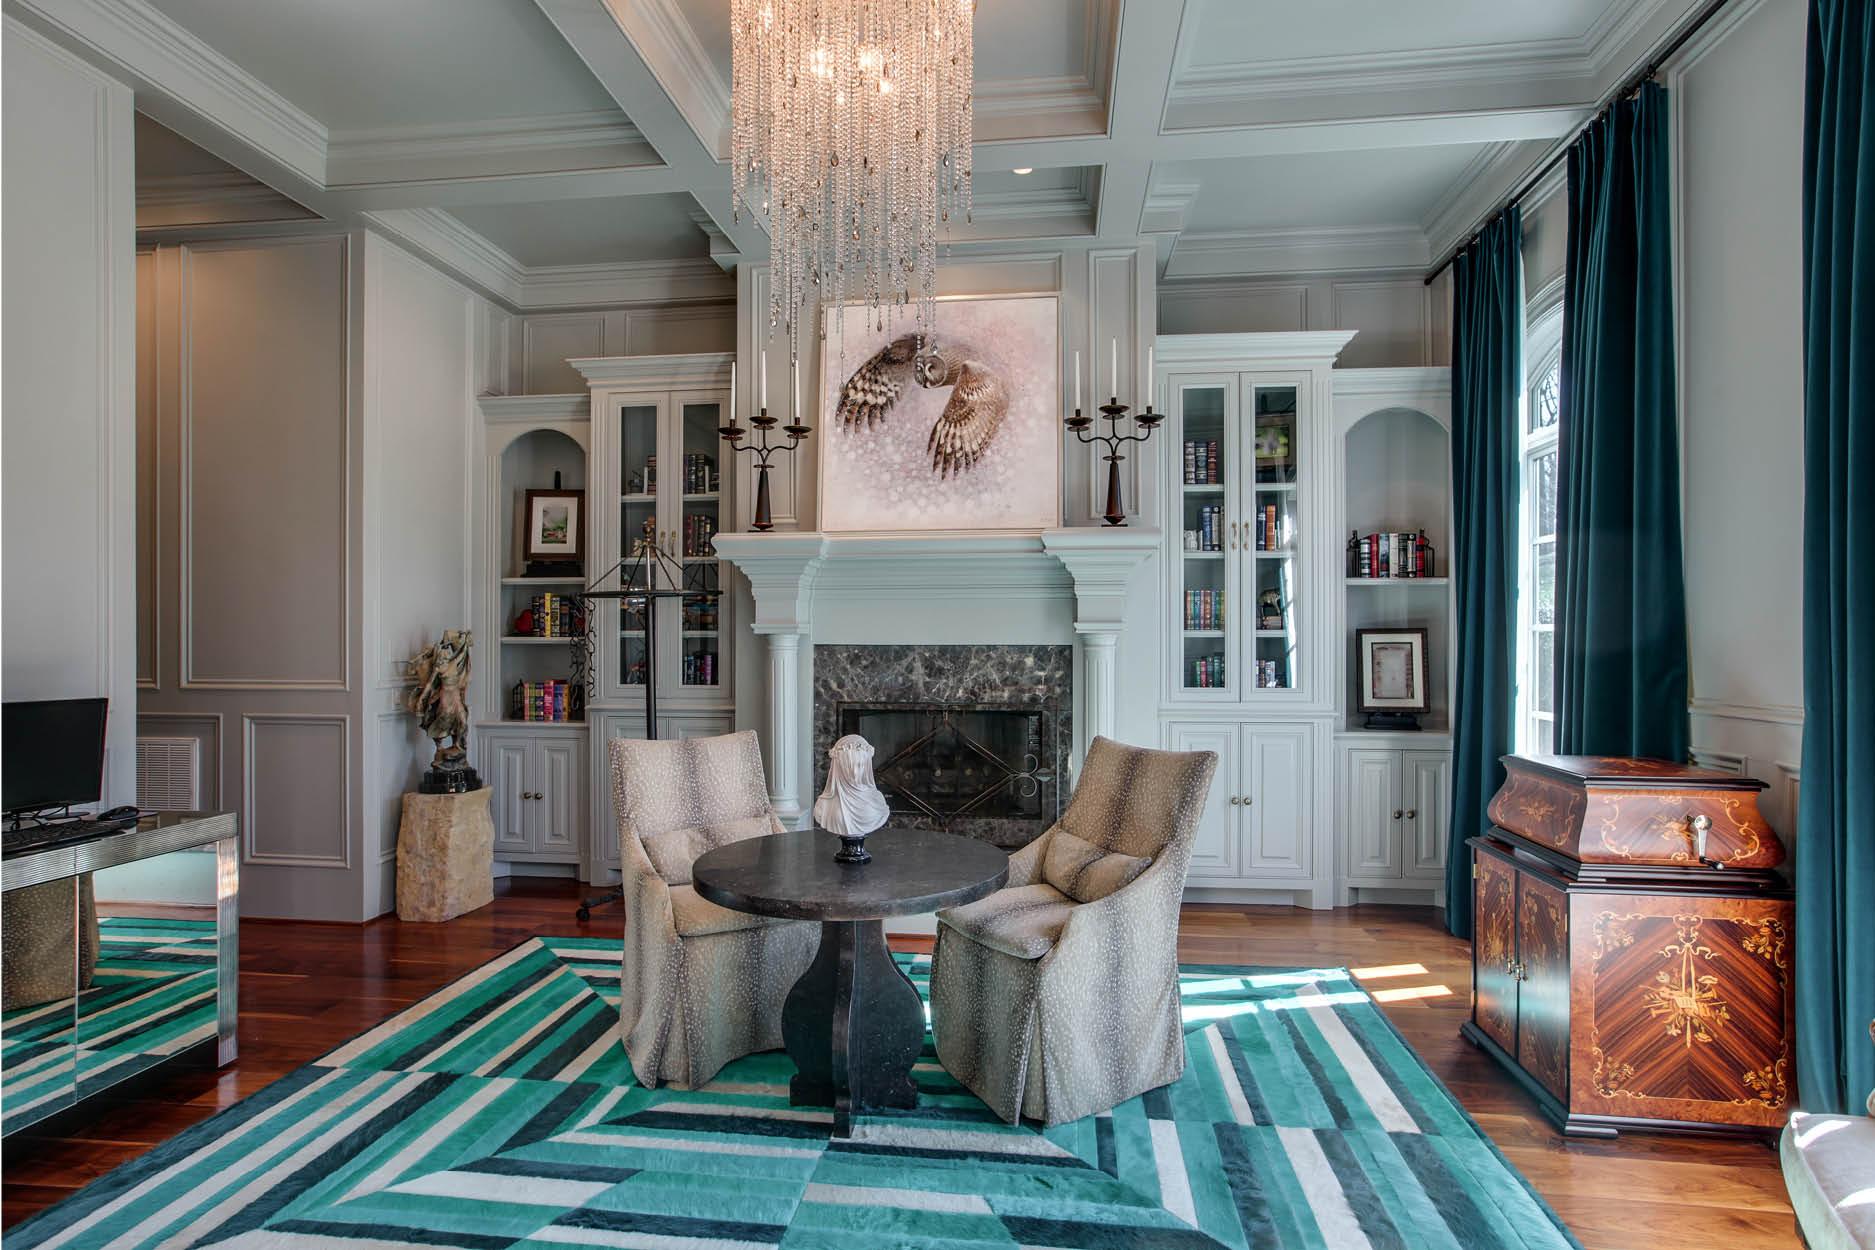 Step Inside Kelly Clarkson's Stunning Tennessee Lakeside Mansion